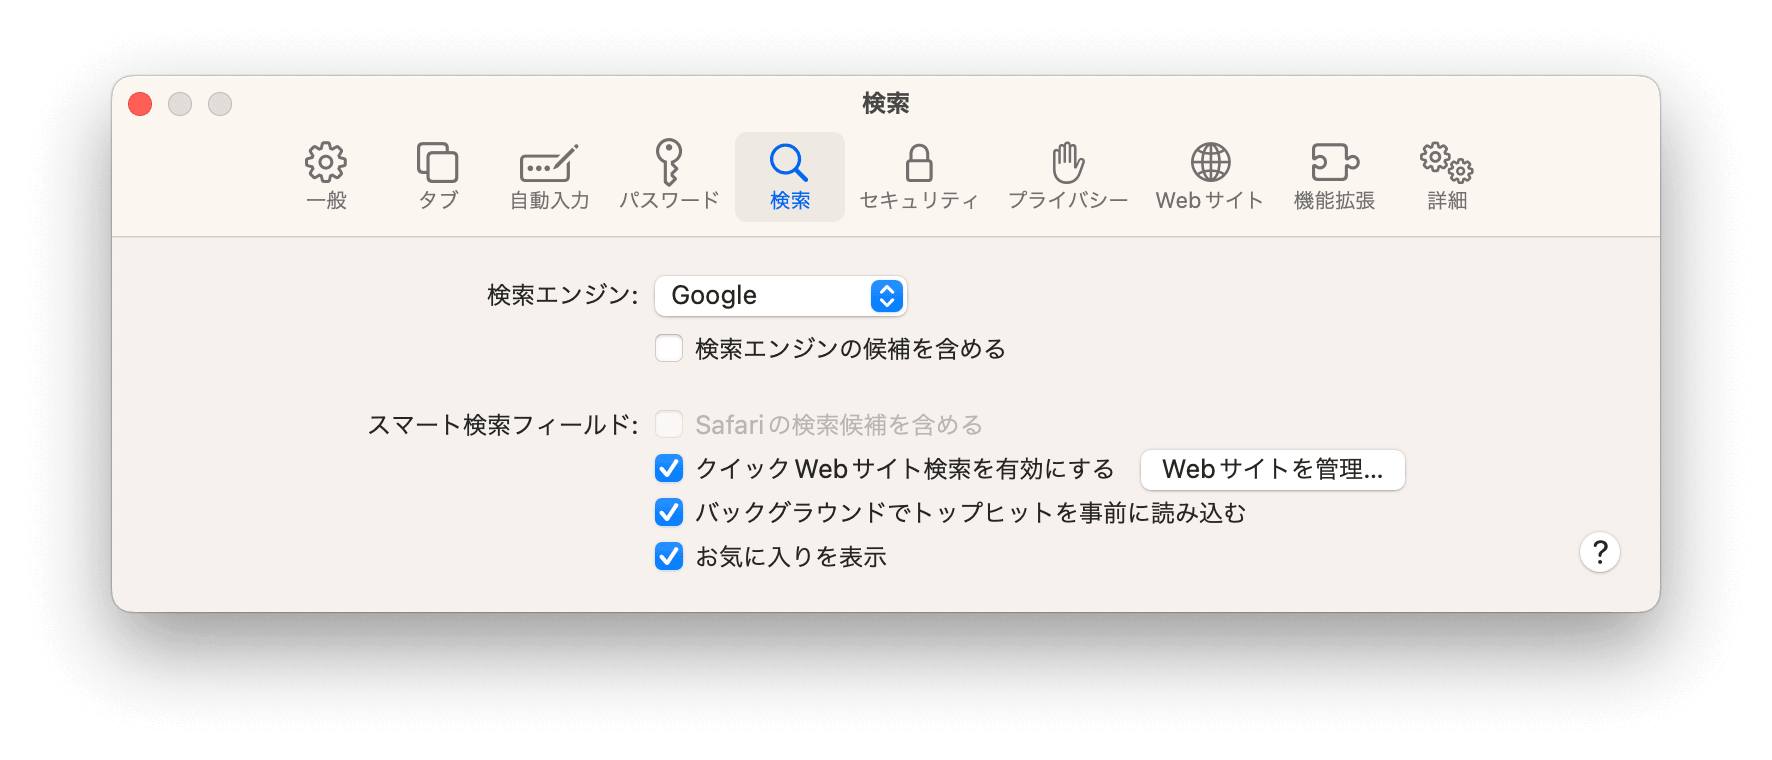 disable-search-engine-suggestions-safari.png